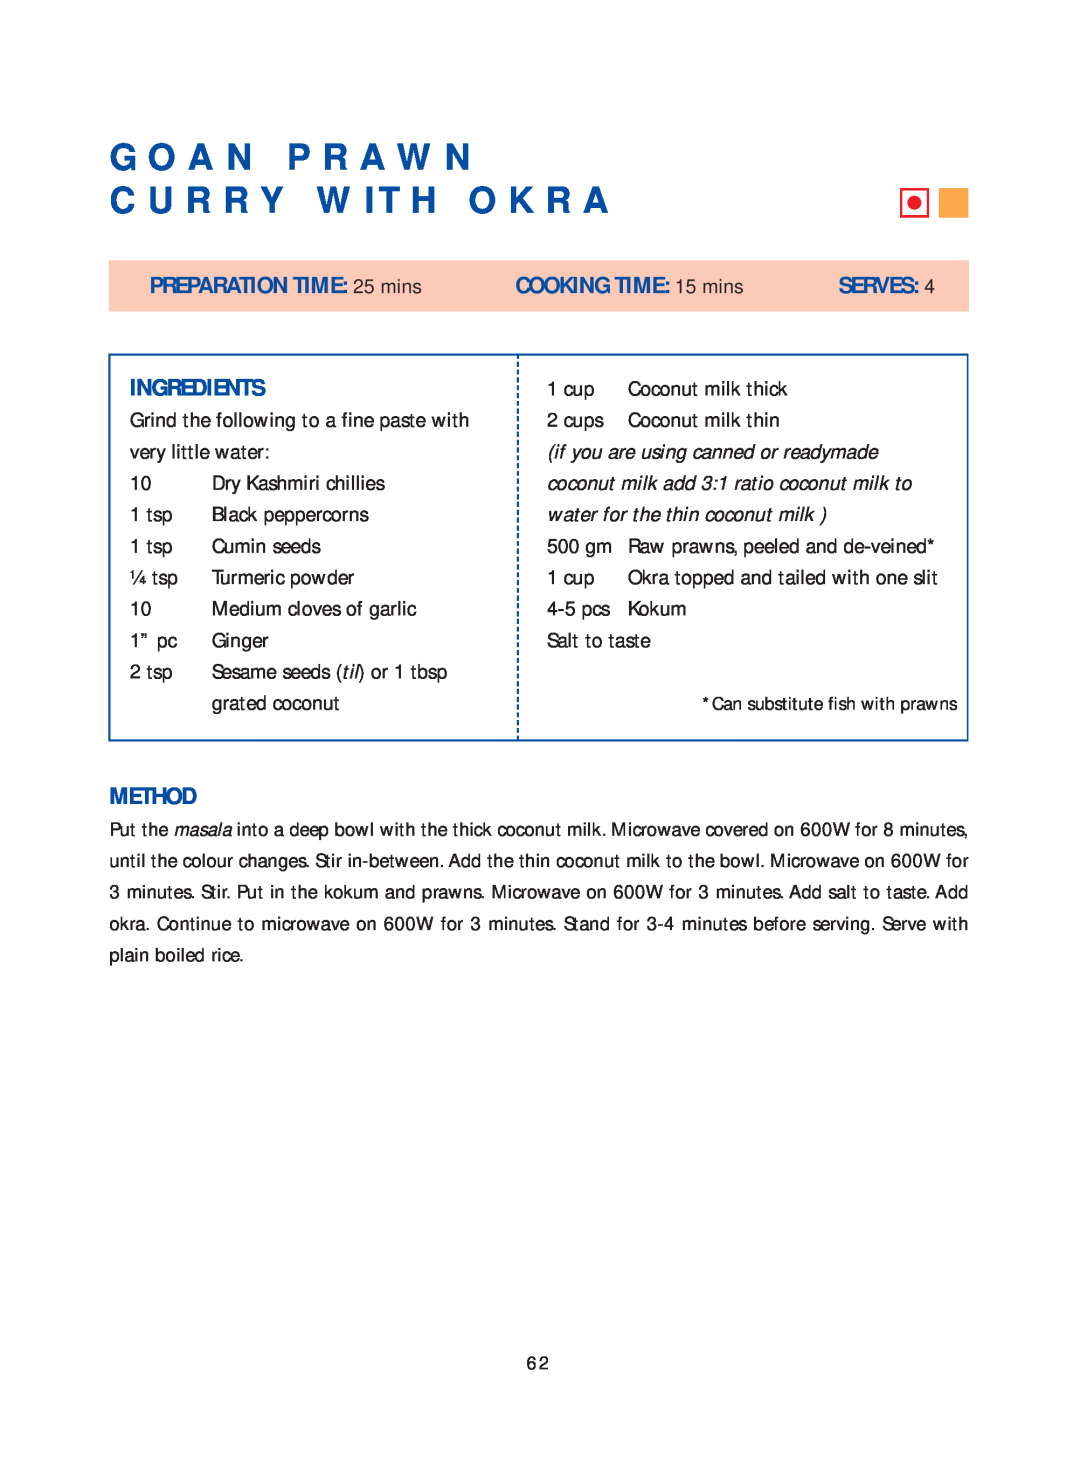 Samsung Microwave Oven warranty Goan Prawn Curry With Okra, if you are using canned or readymade 